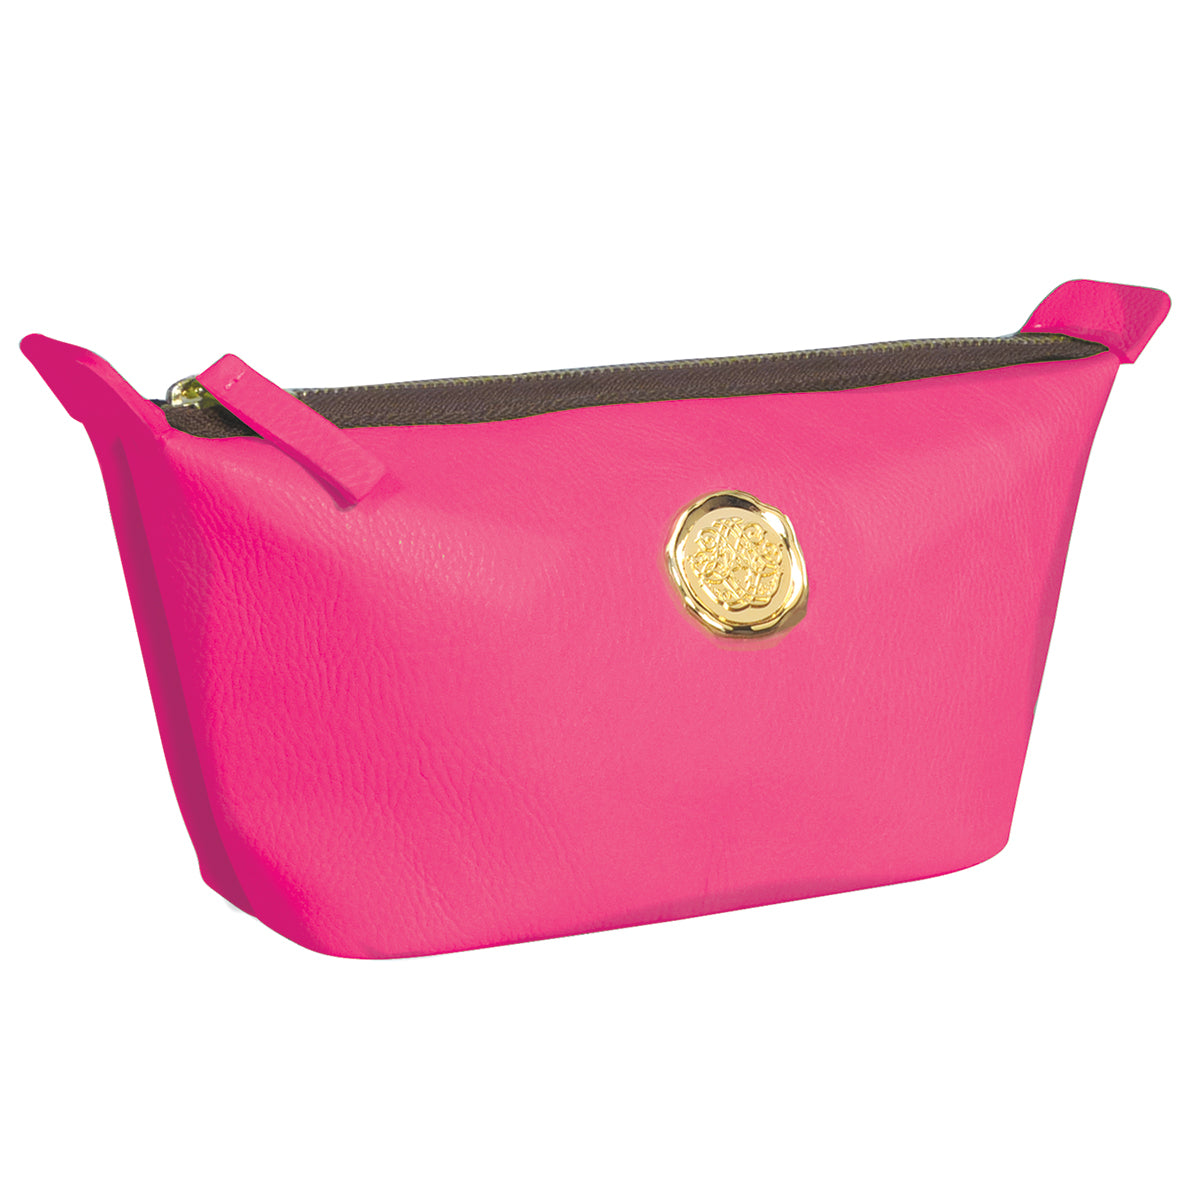 a pink purse with a gold emblem on the front.